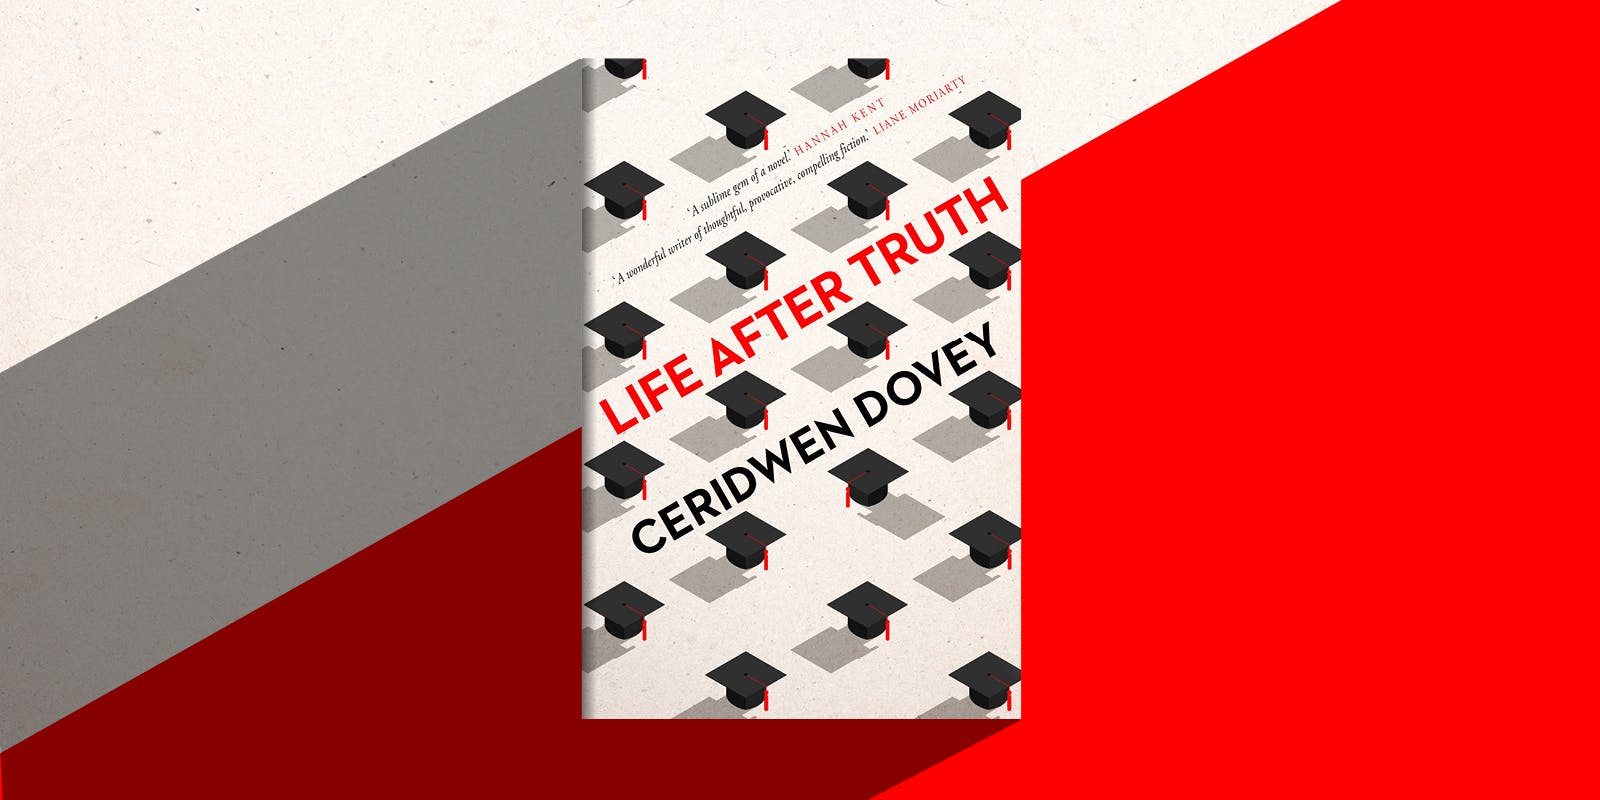 Life After Truth book club notes